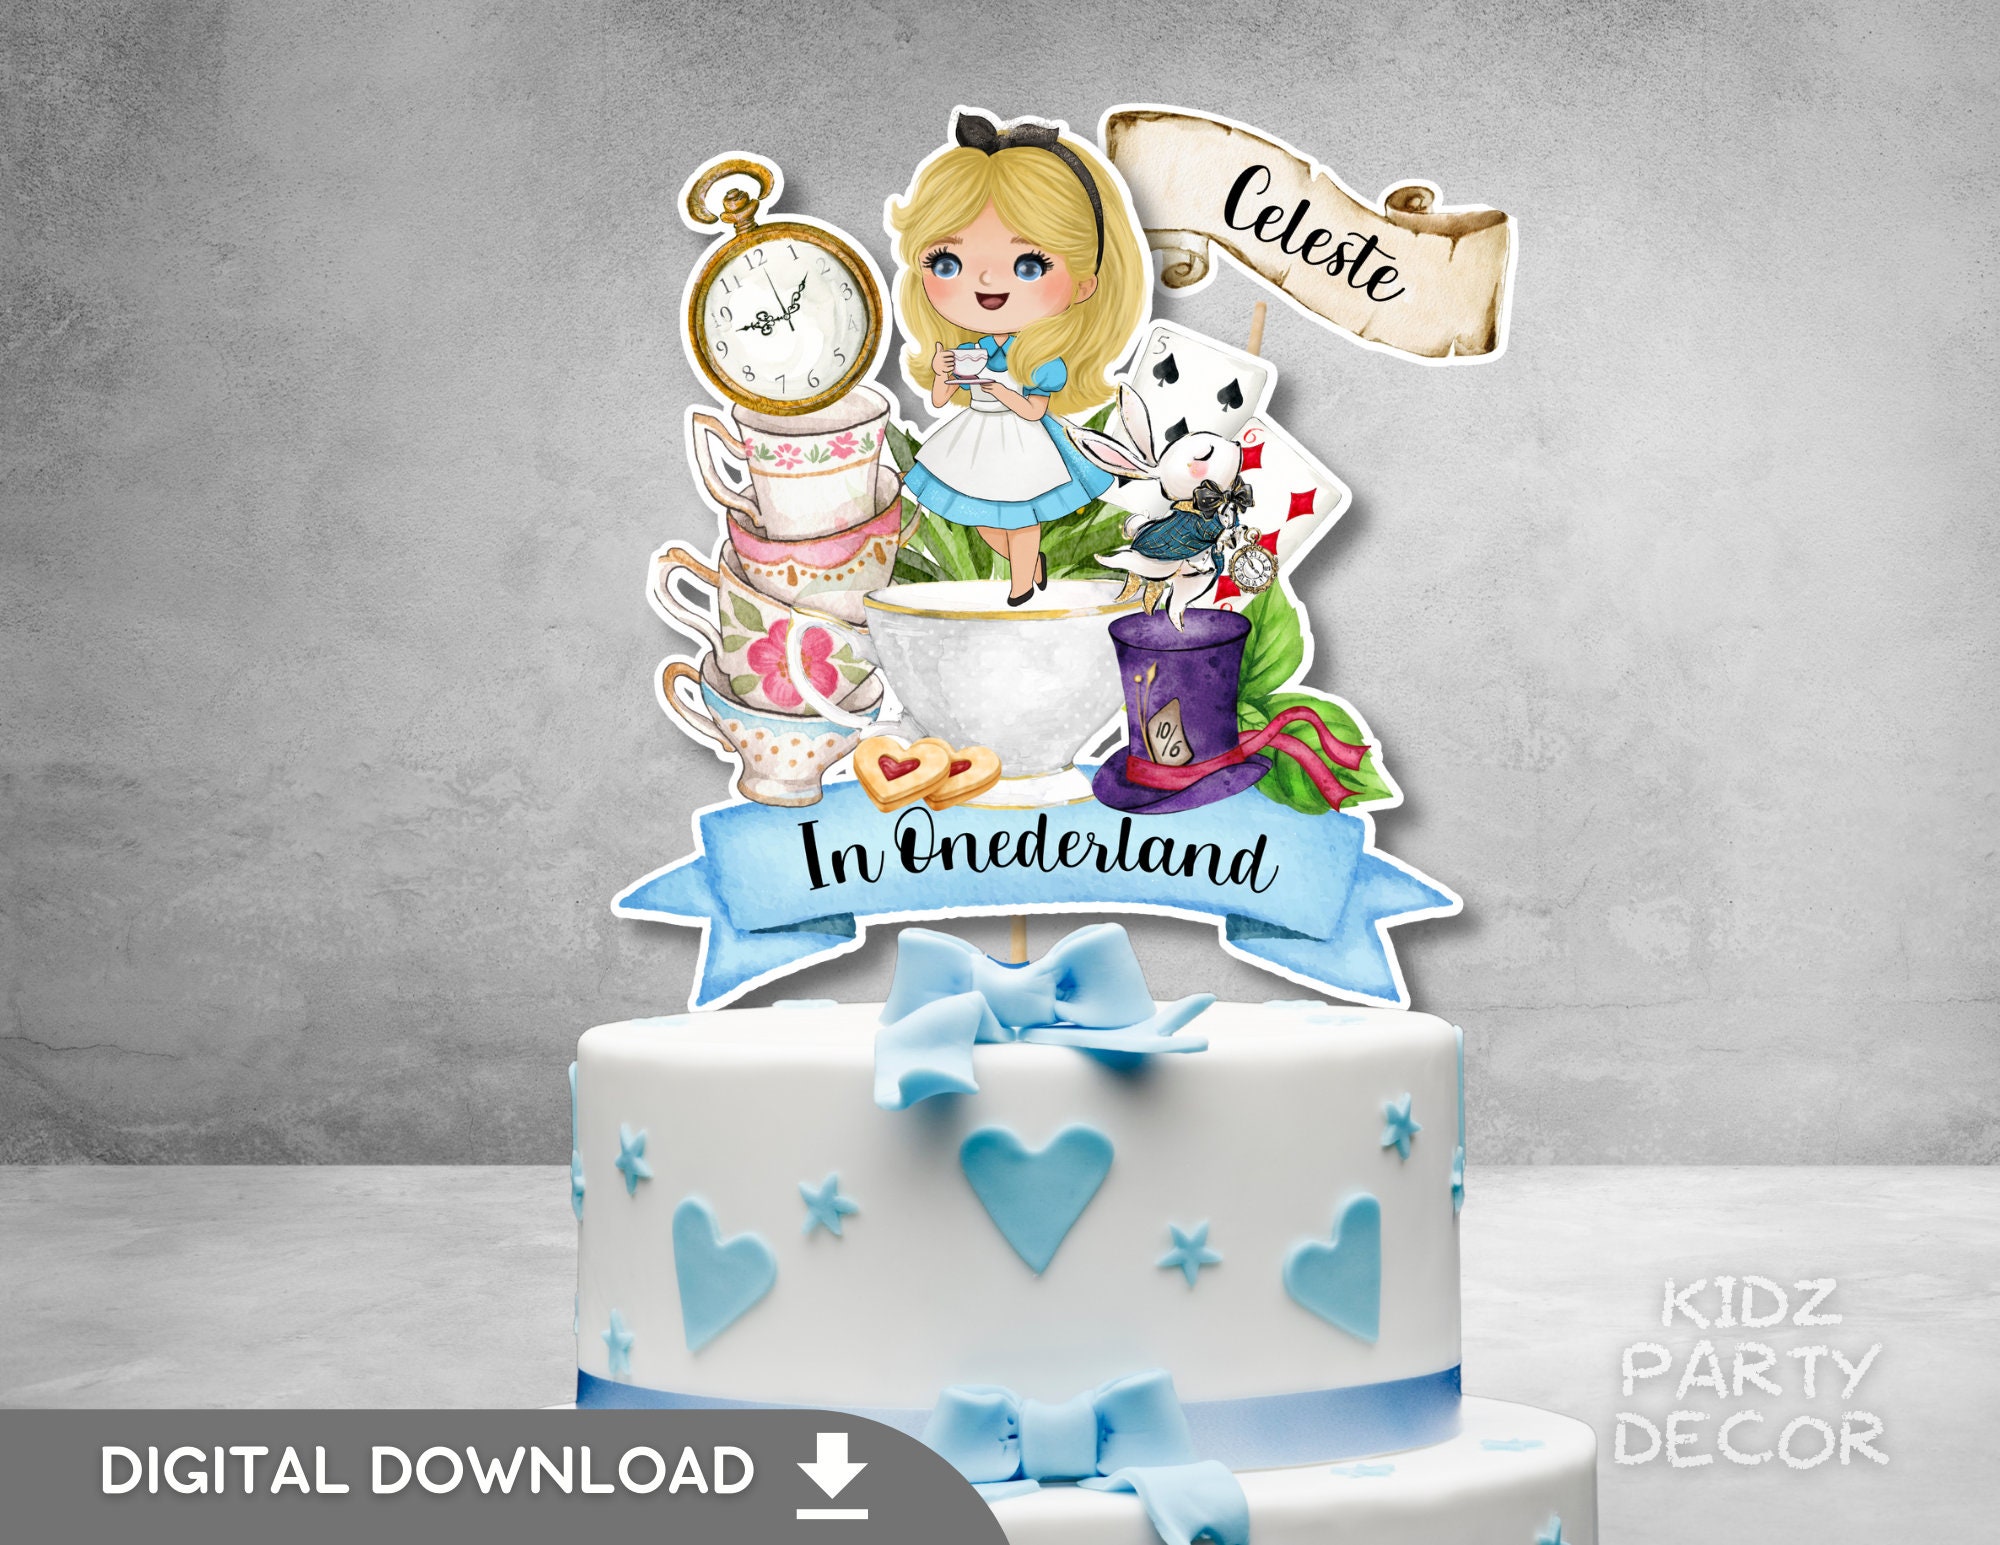 Alice and Friends Birthday Cake Topper Set with Alice Characters and Decorative Themed Accessories (Unique Design)